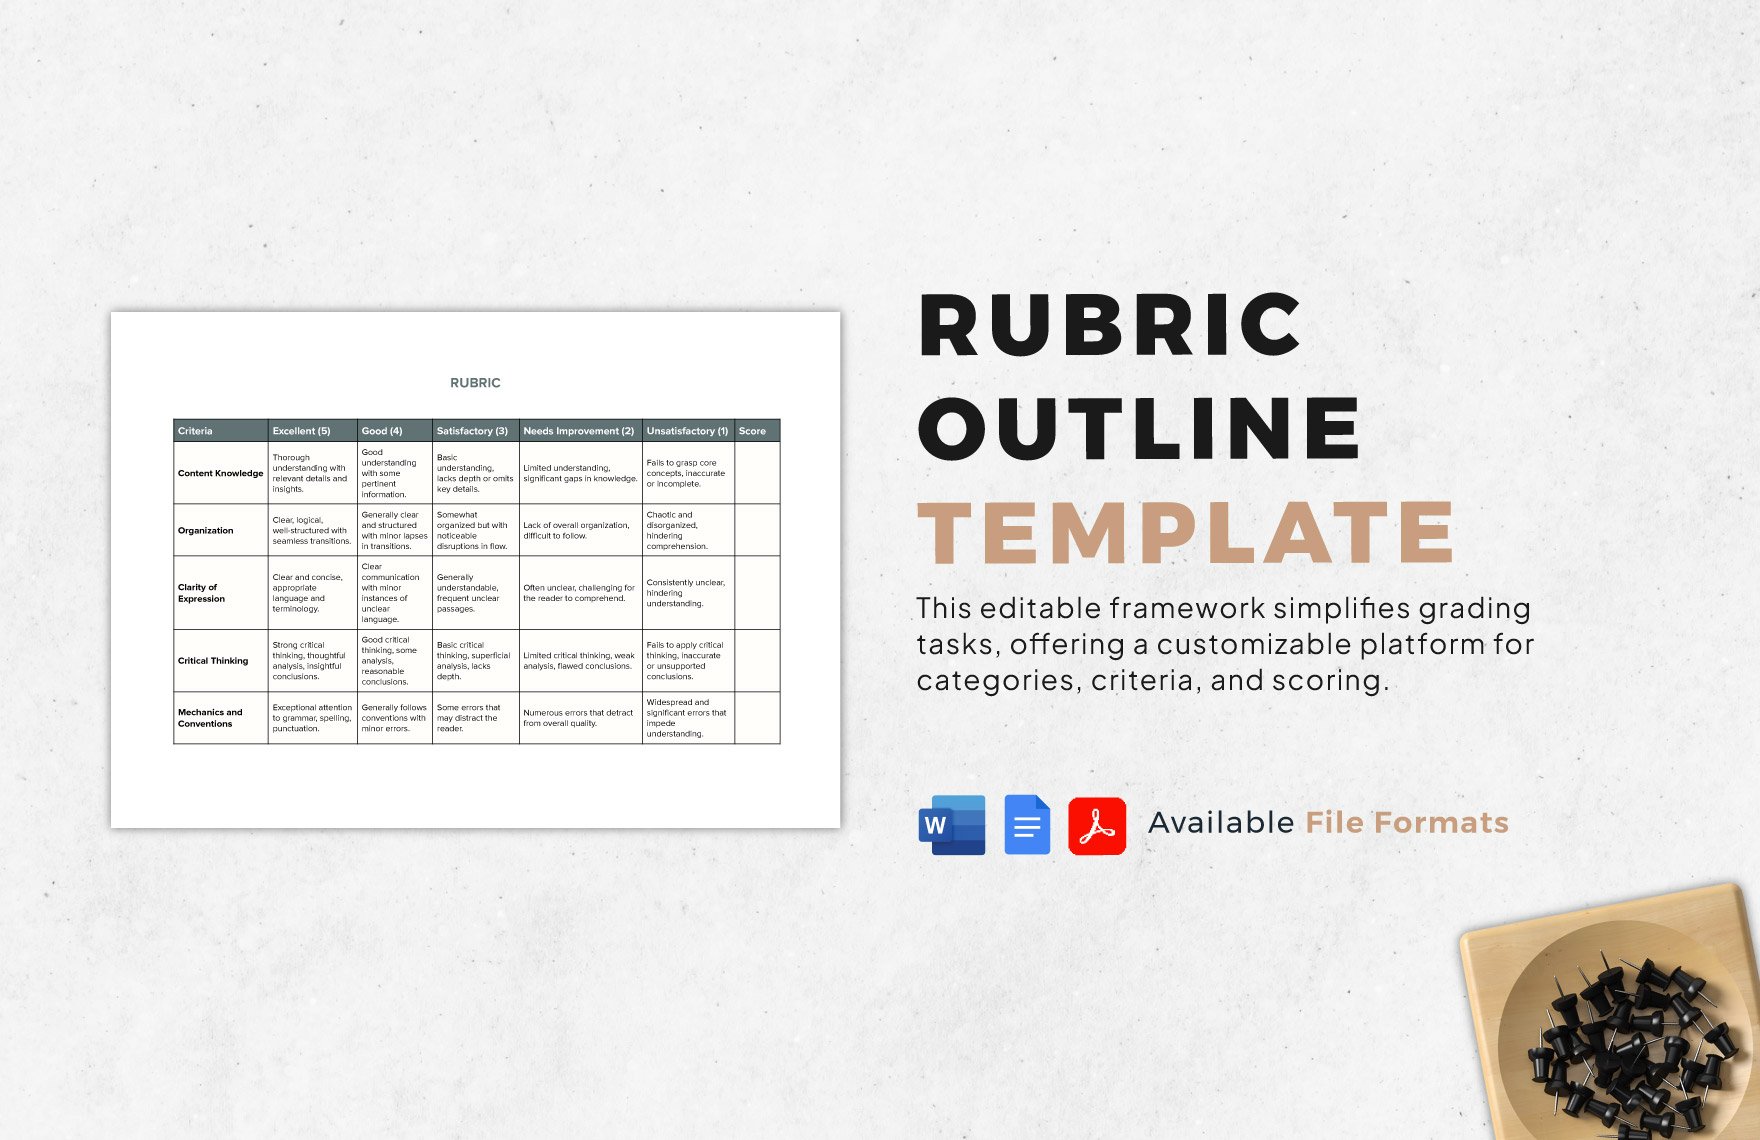 Rubric Outline Template